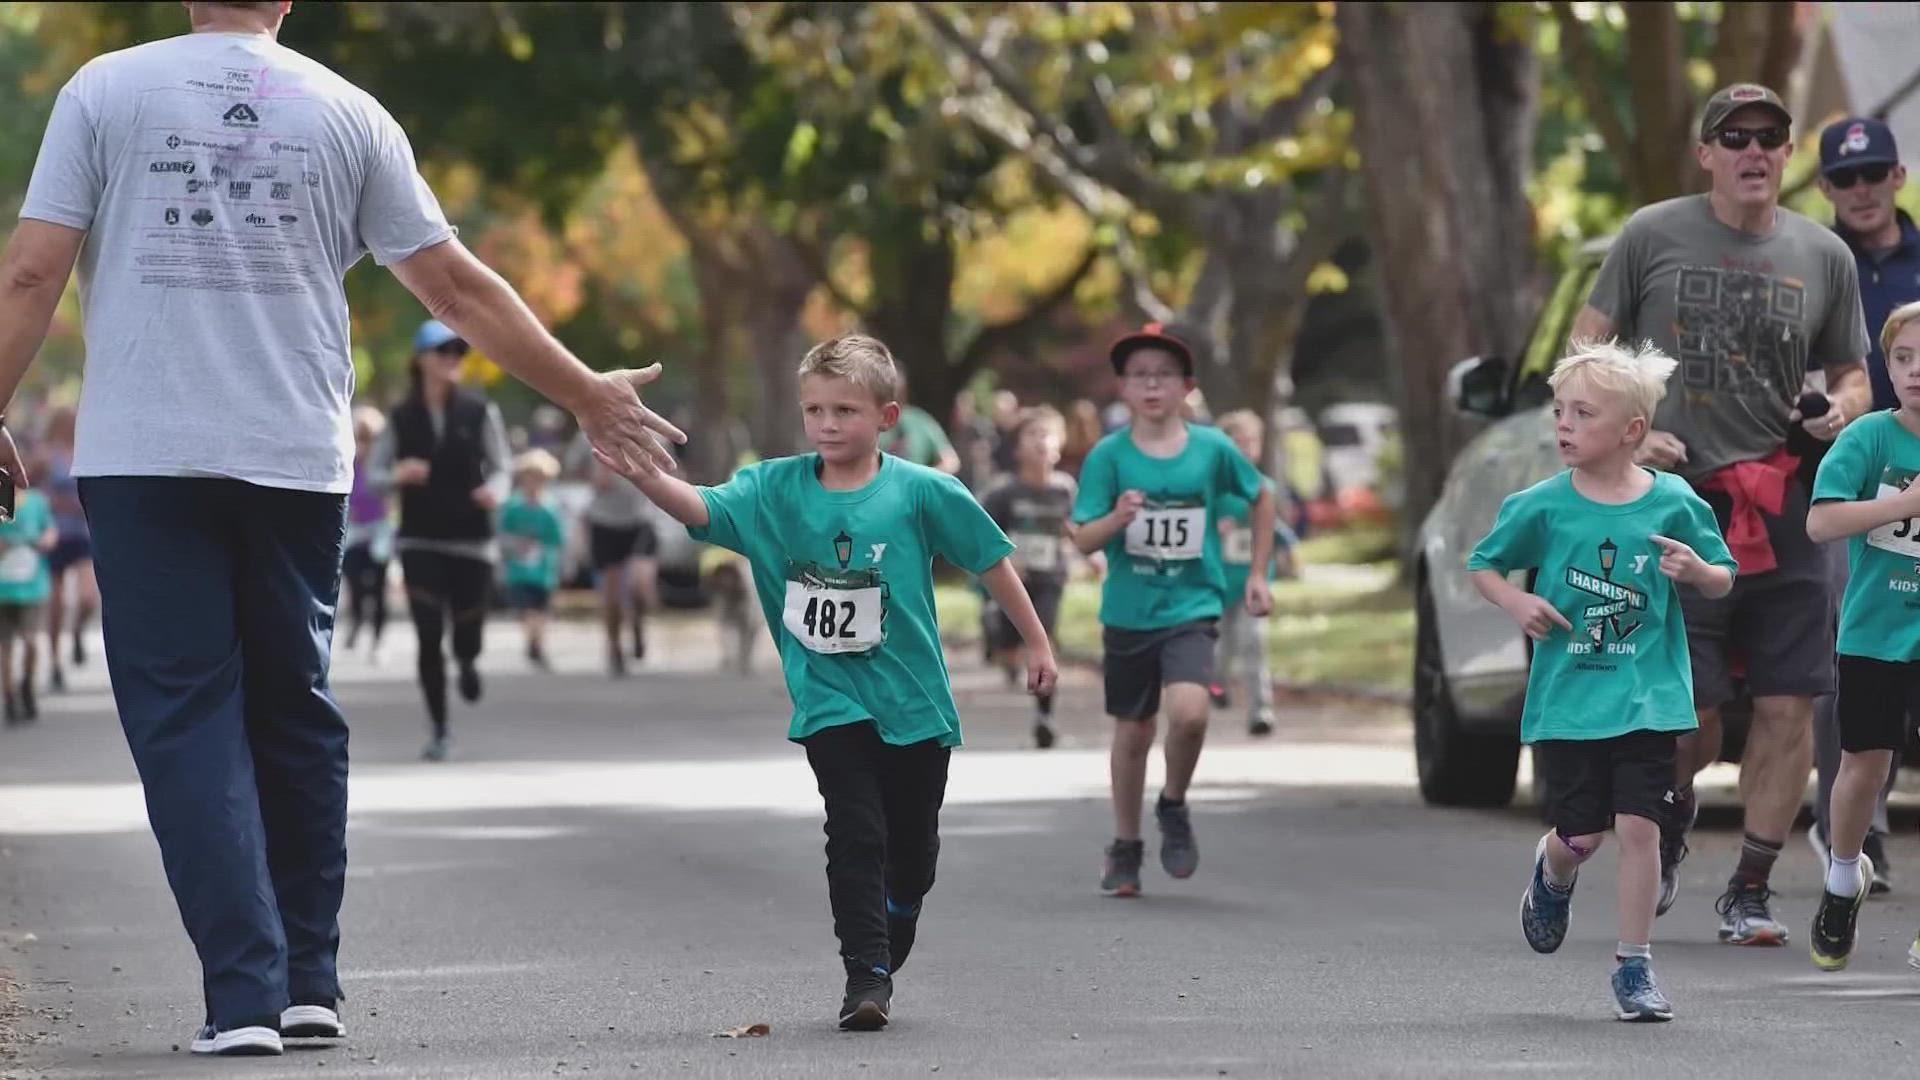 The YMCA of the Treasure Valley hosted its annual YMCA Harrison Classic Kids Run, Sunday at 3 p.m., on Harrison Boulevard in Boise.